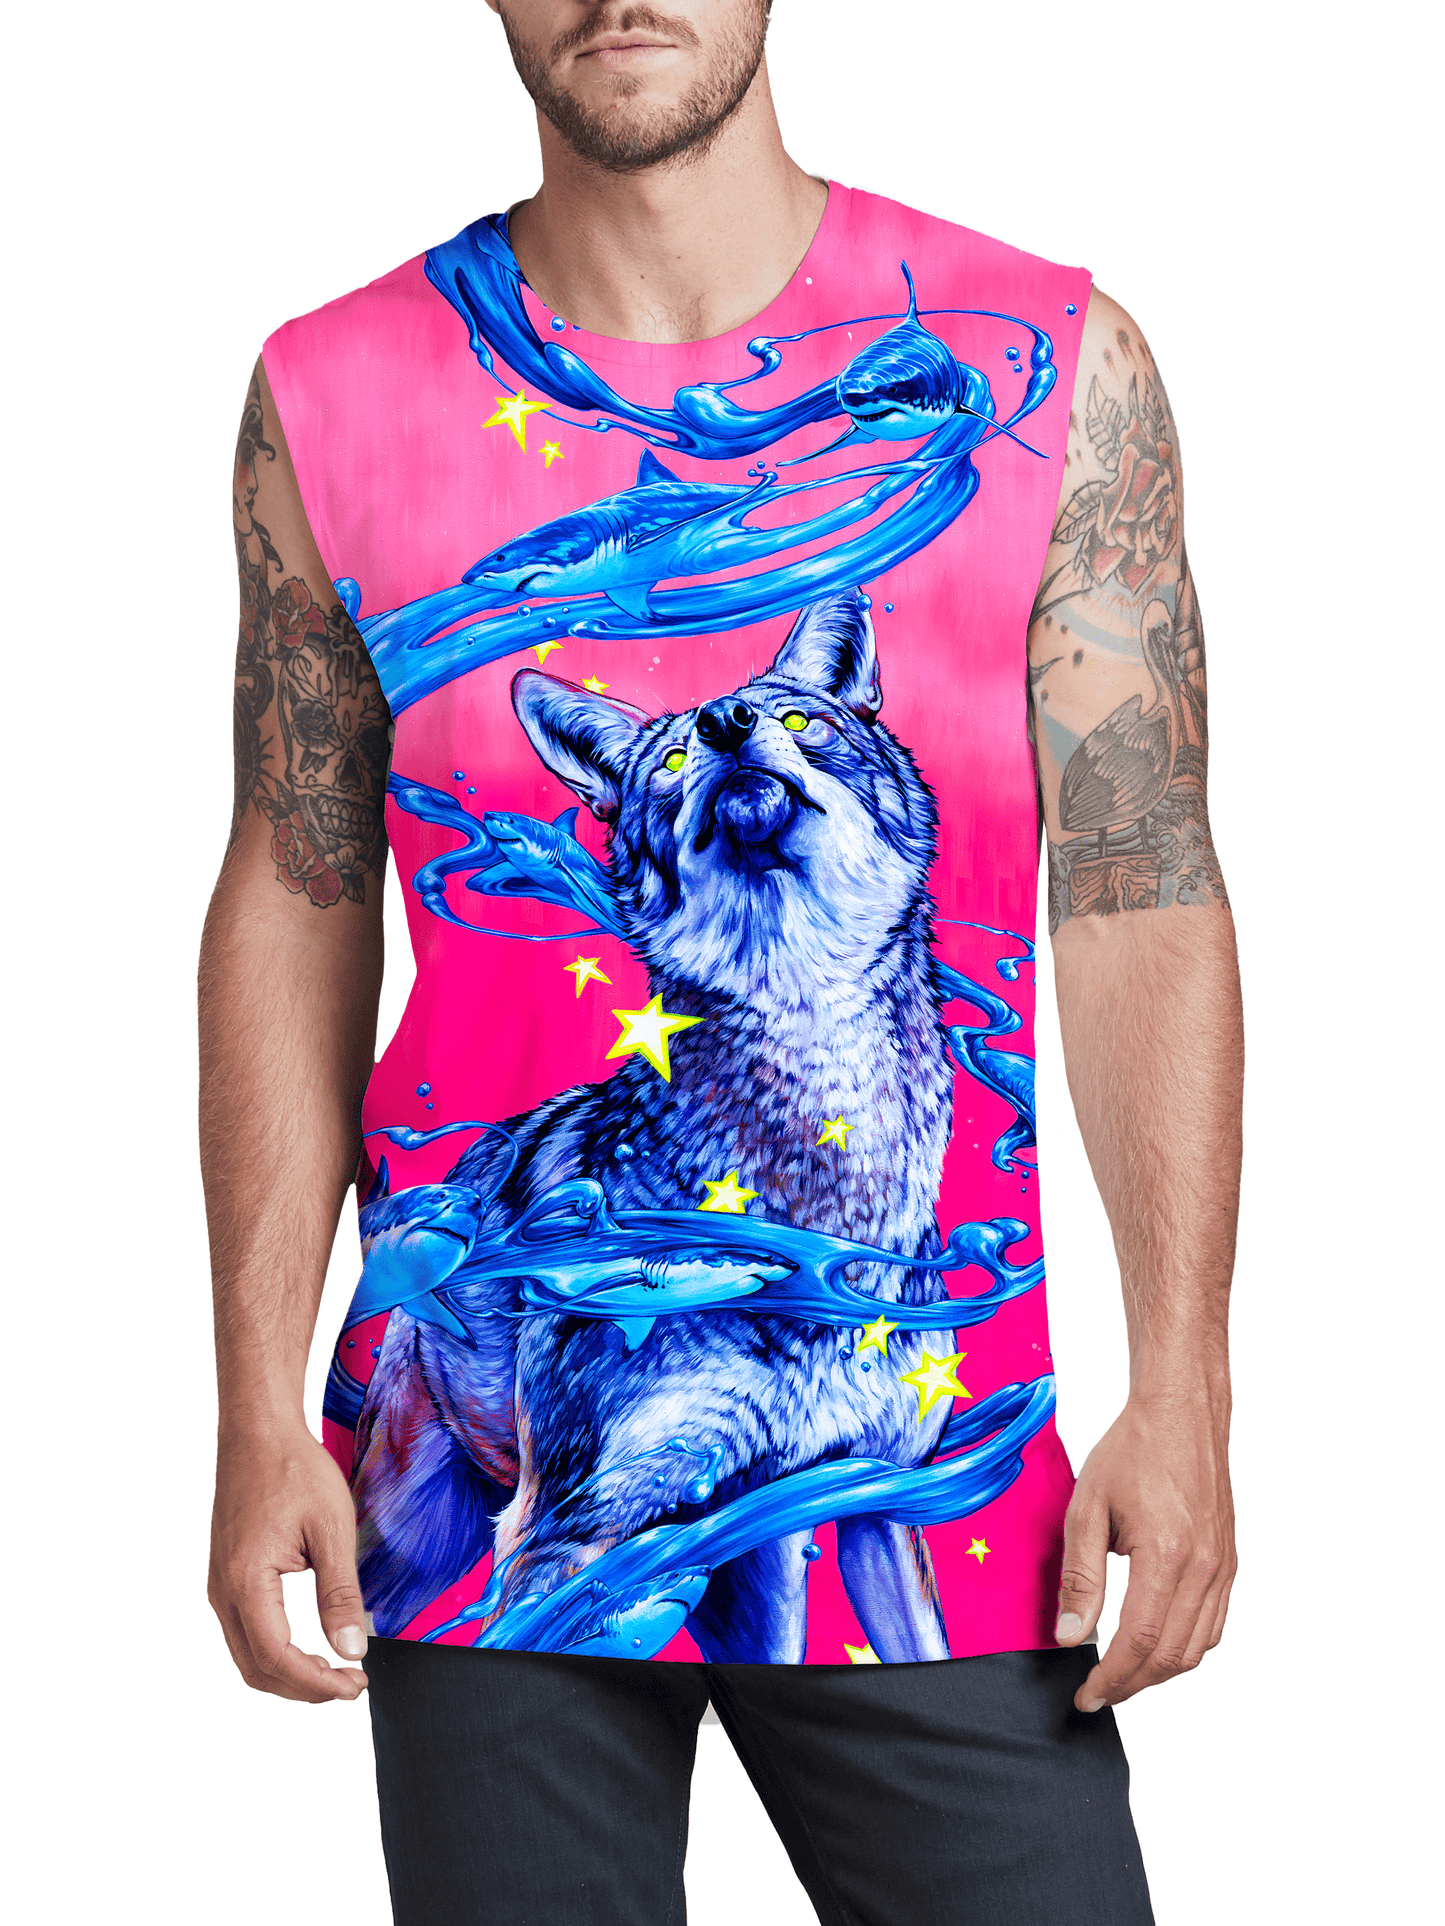 Pack Leader Men's Muscle Tank, Noctum X Truth, | iEDM